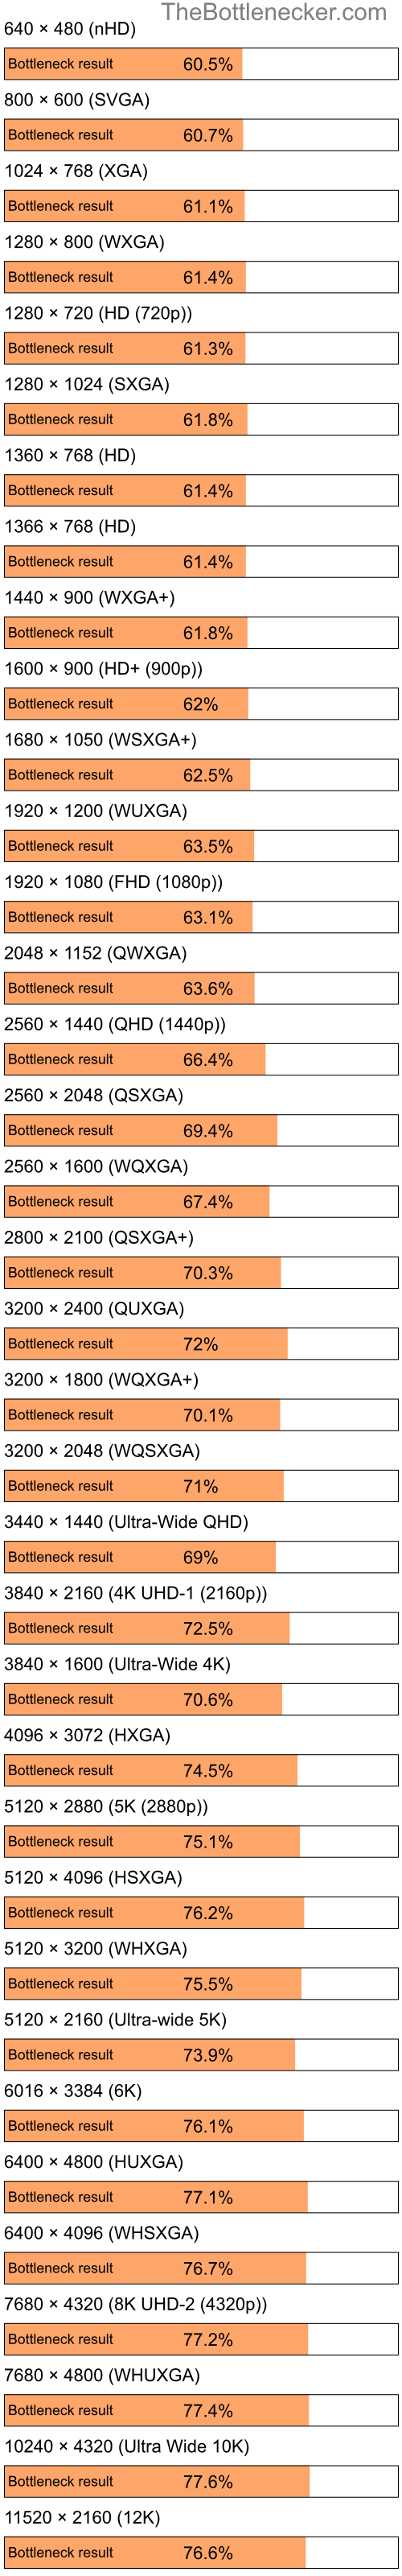 Bottleneck results by resolution for Intel Pentium 4 and AMD Radeon X700 in Processor Intense Tasks